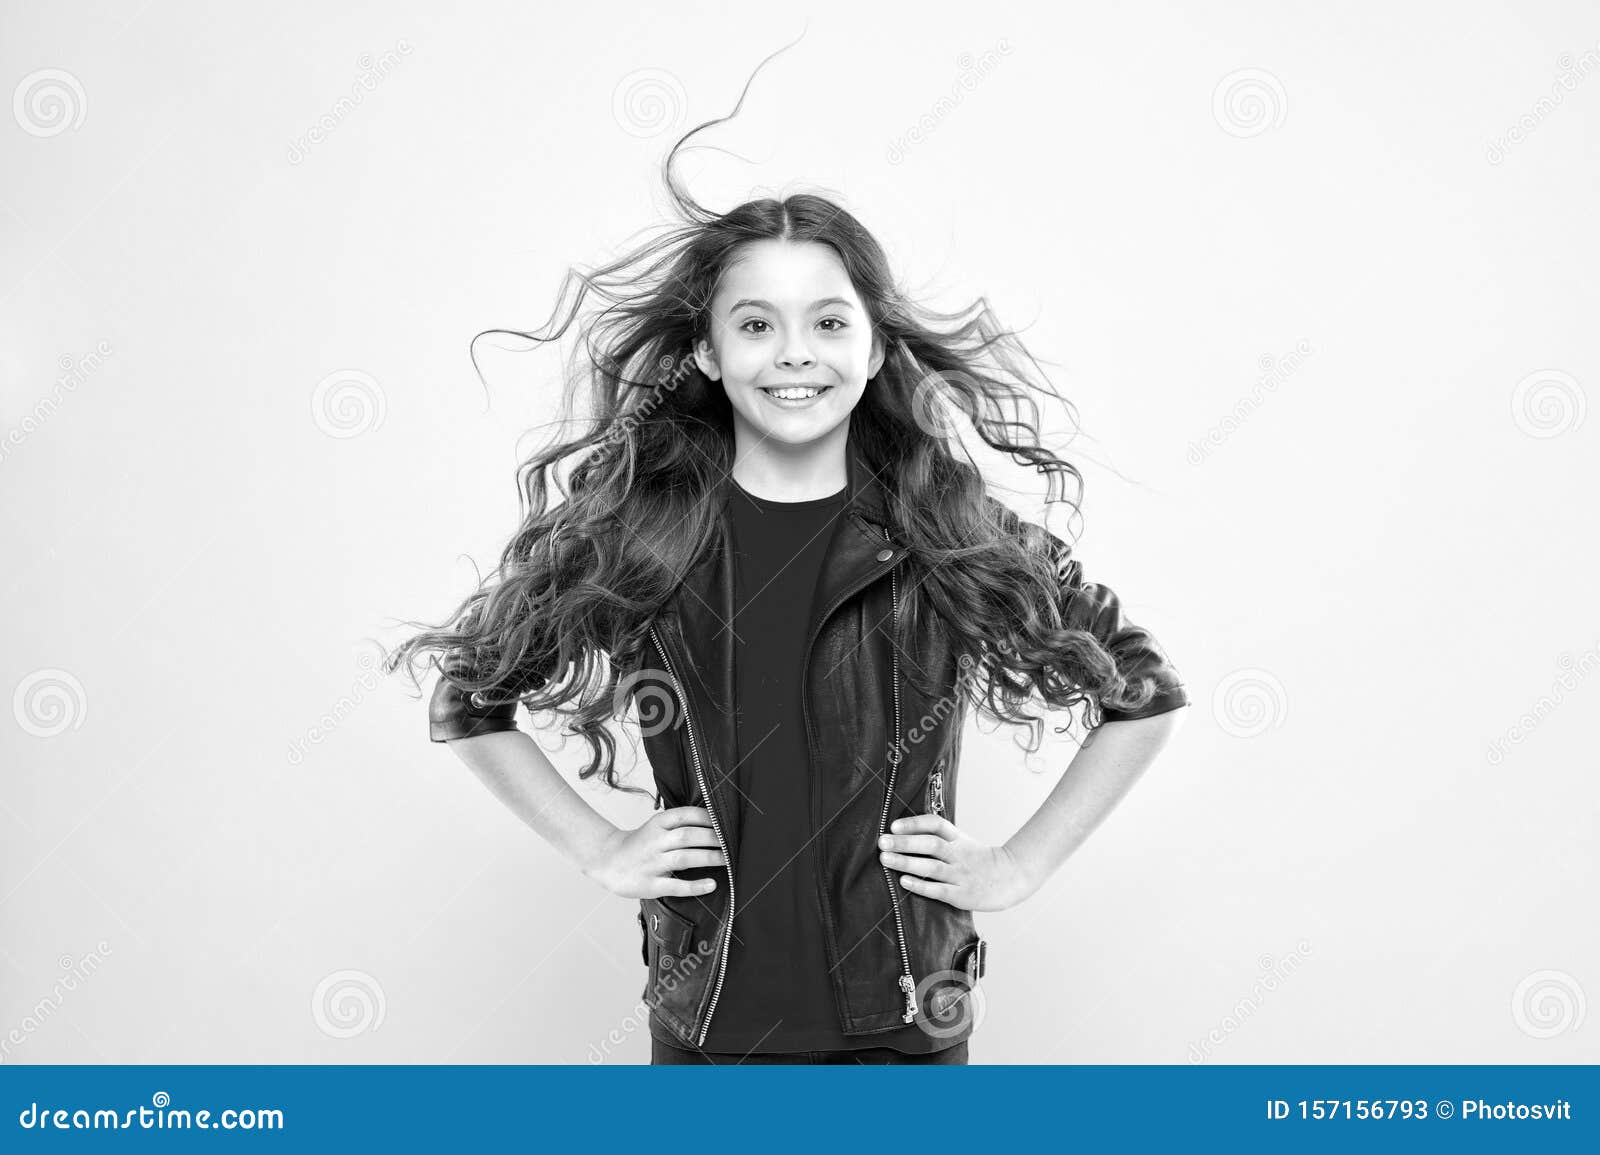 Her Hair Radiates Health. Protect Hair from Wind Damage. Girl Adorable ...